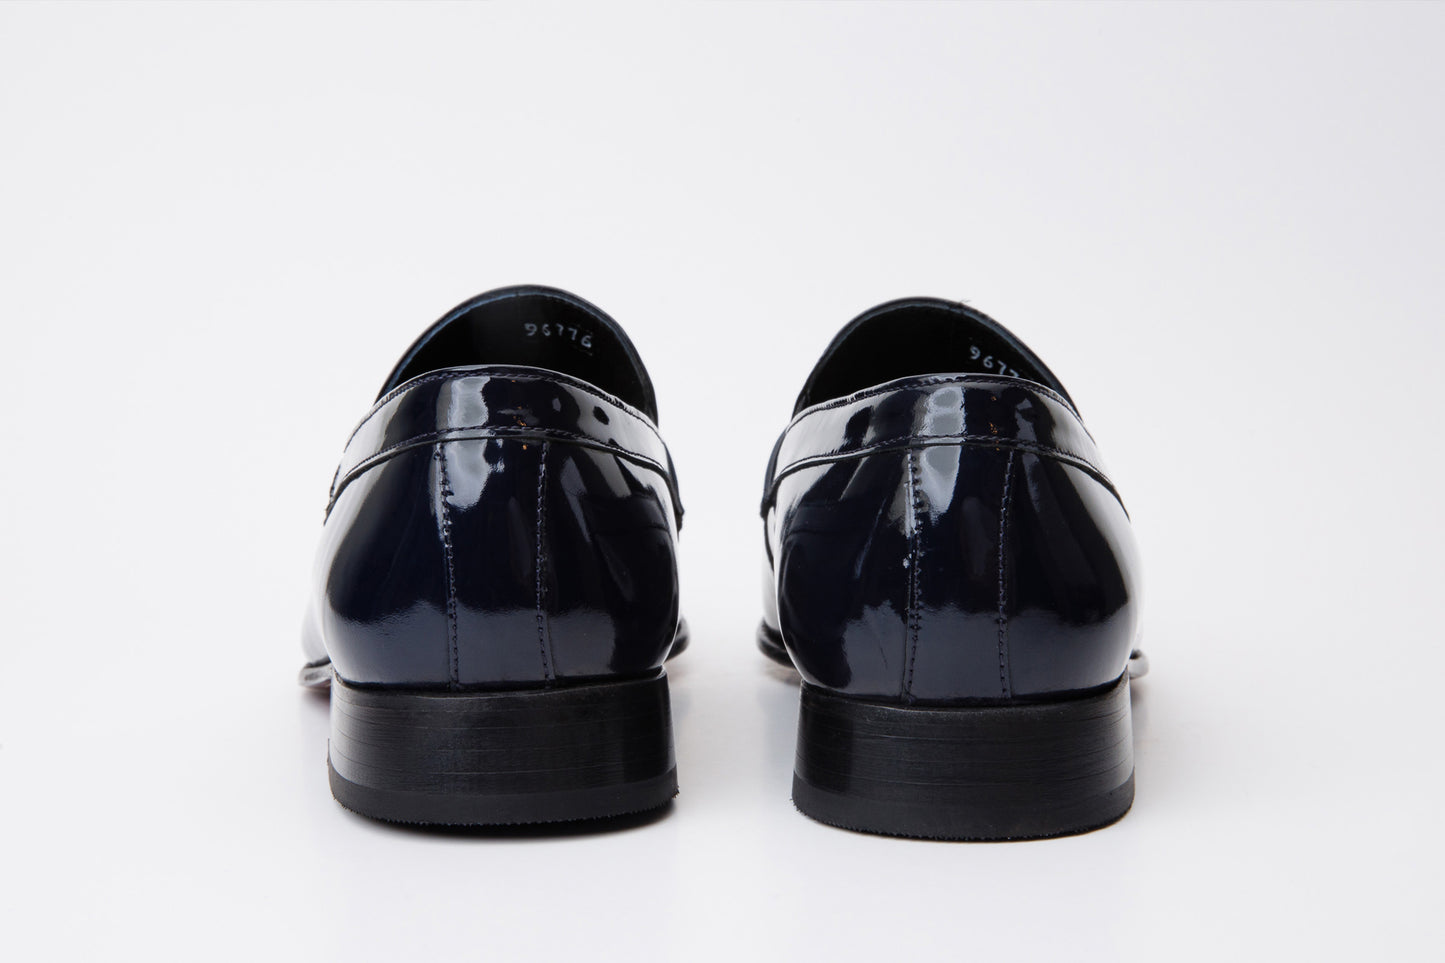 The Dodoma Navy Patent Leather Loafer Men Shoe